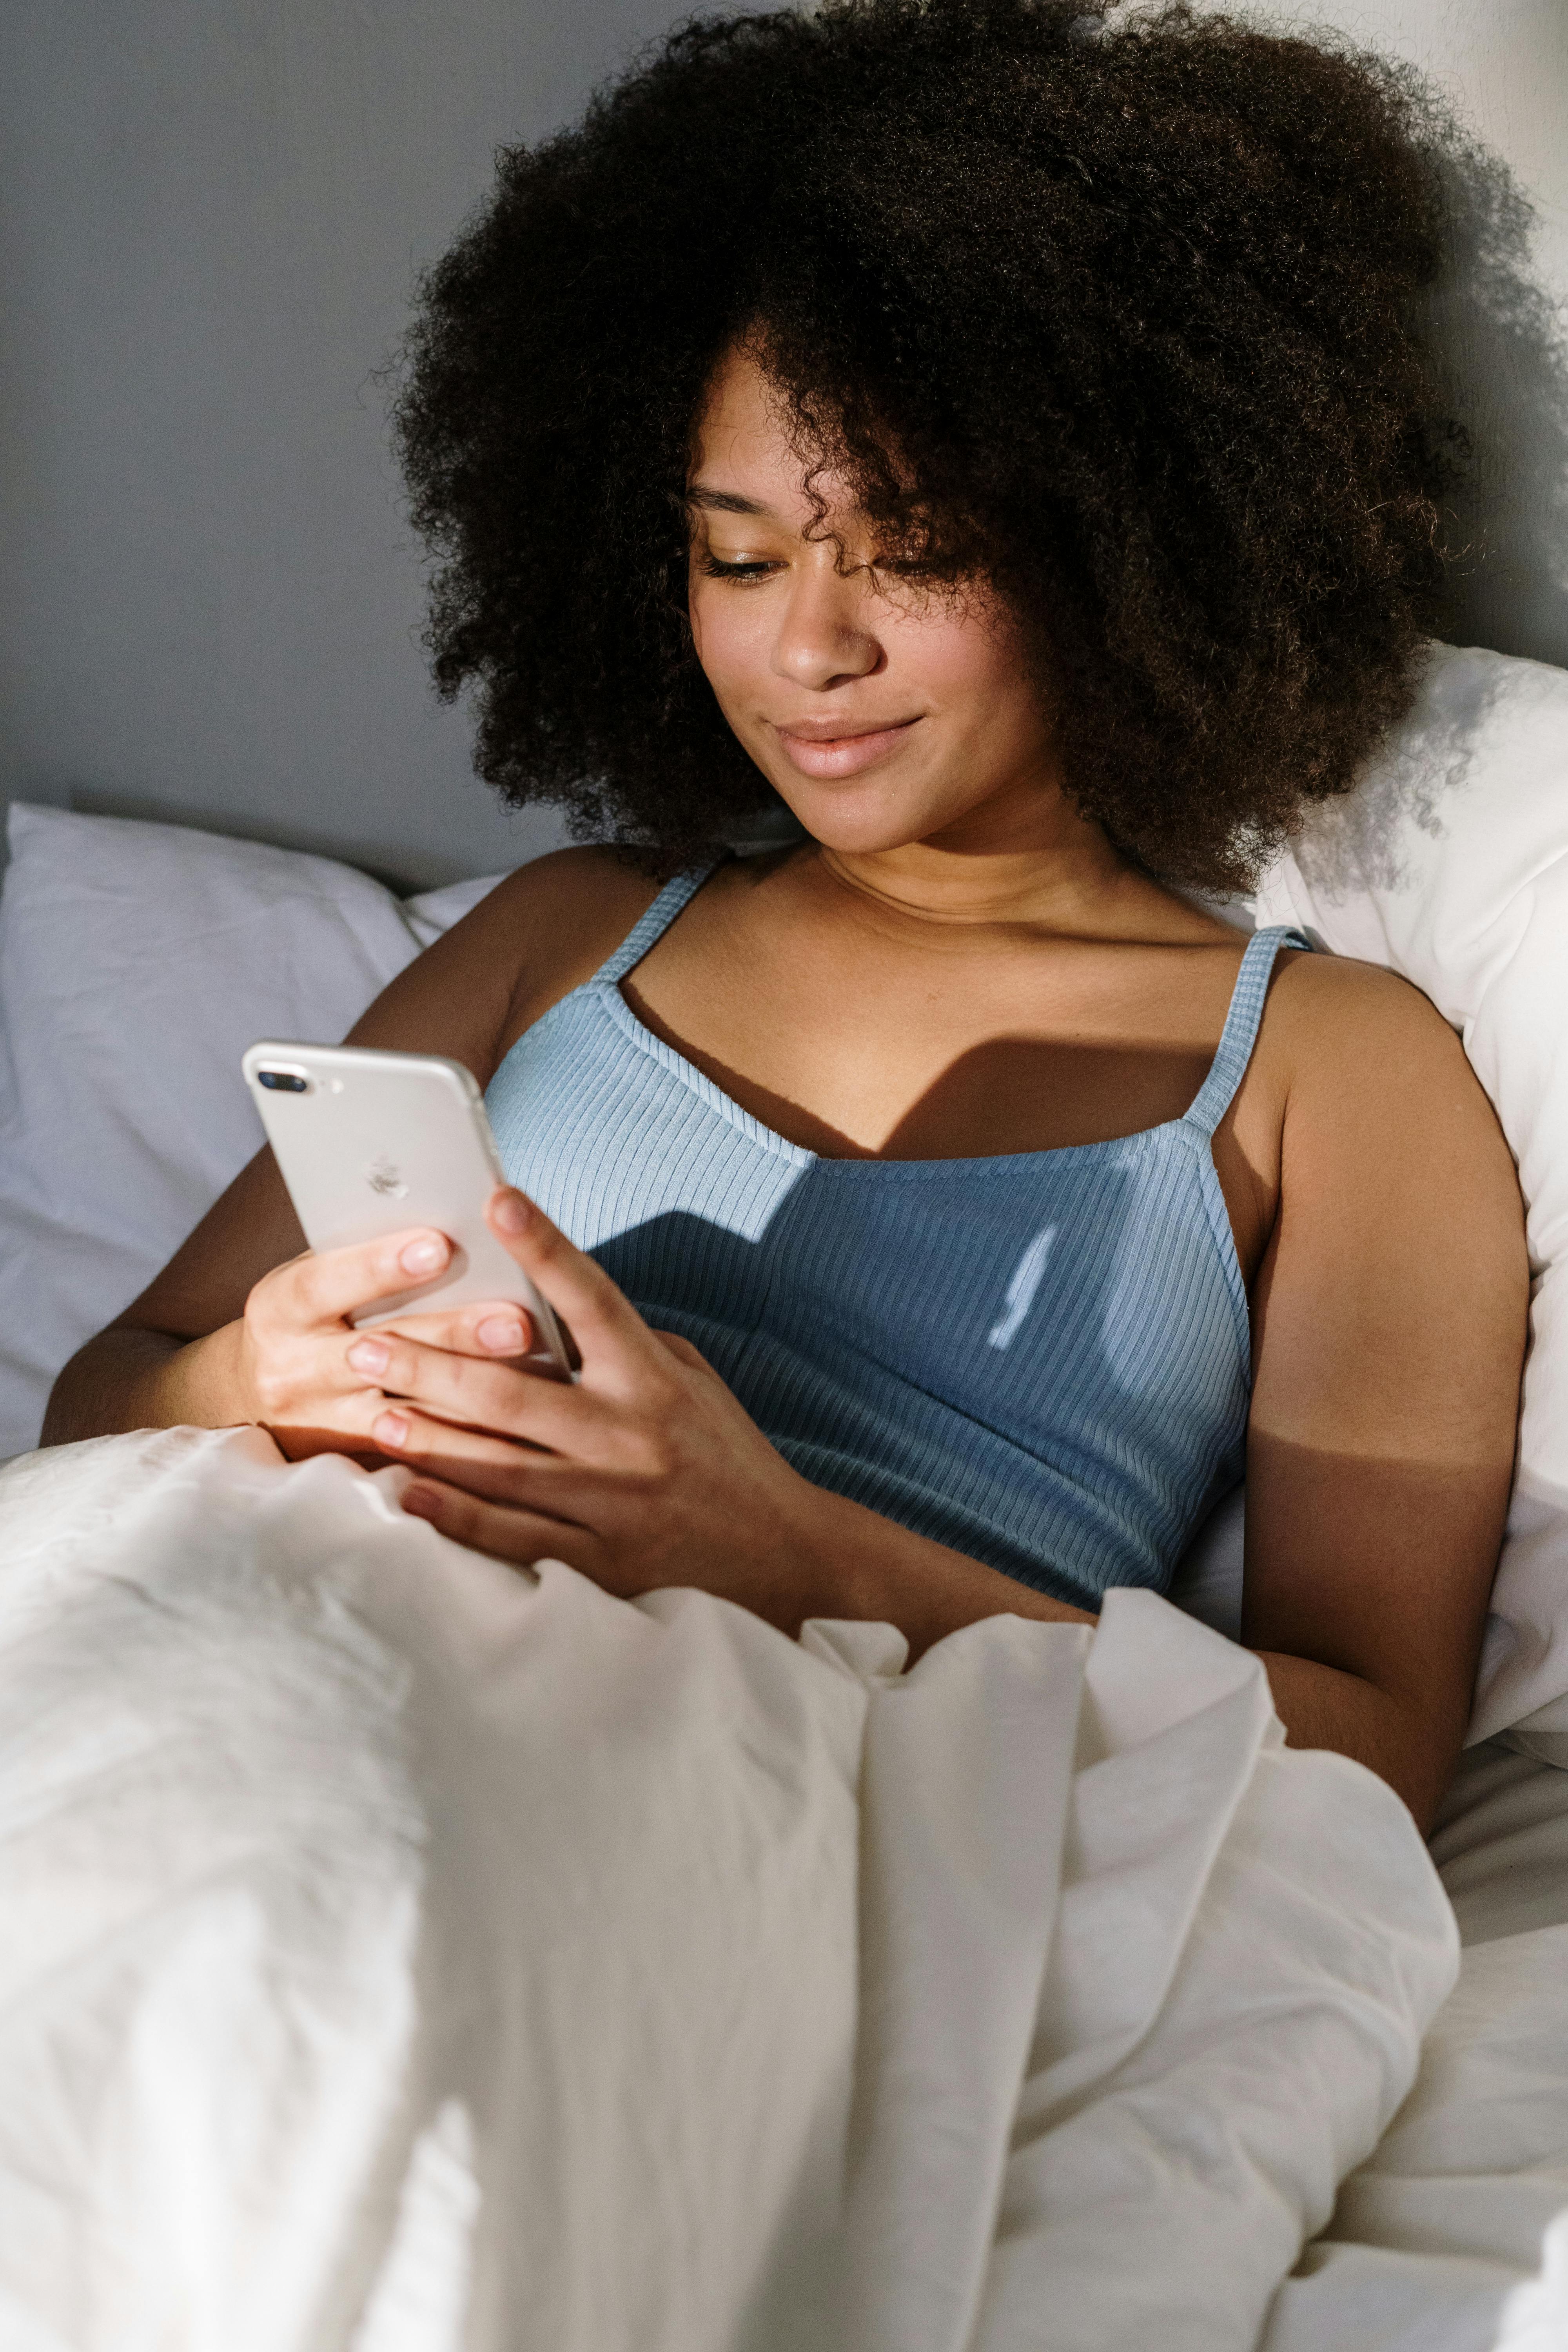 A woman smiling while looking at her phone in bed | Source: Pexels